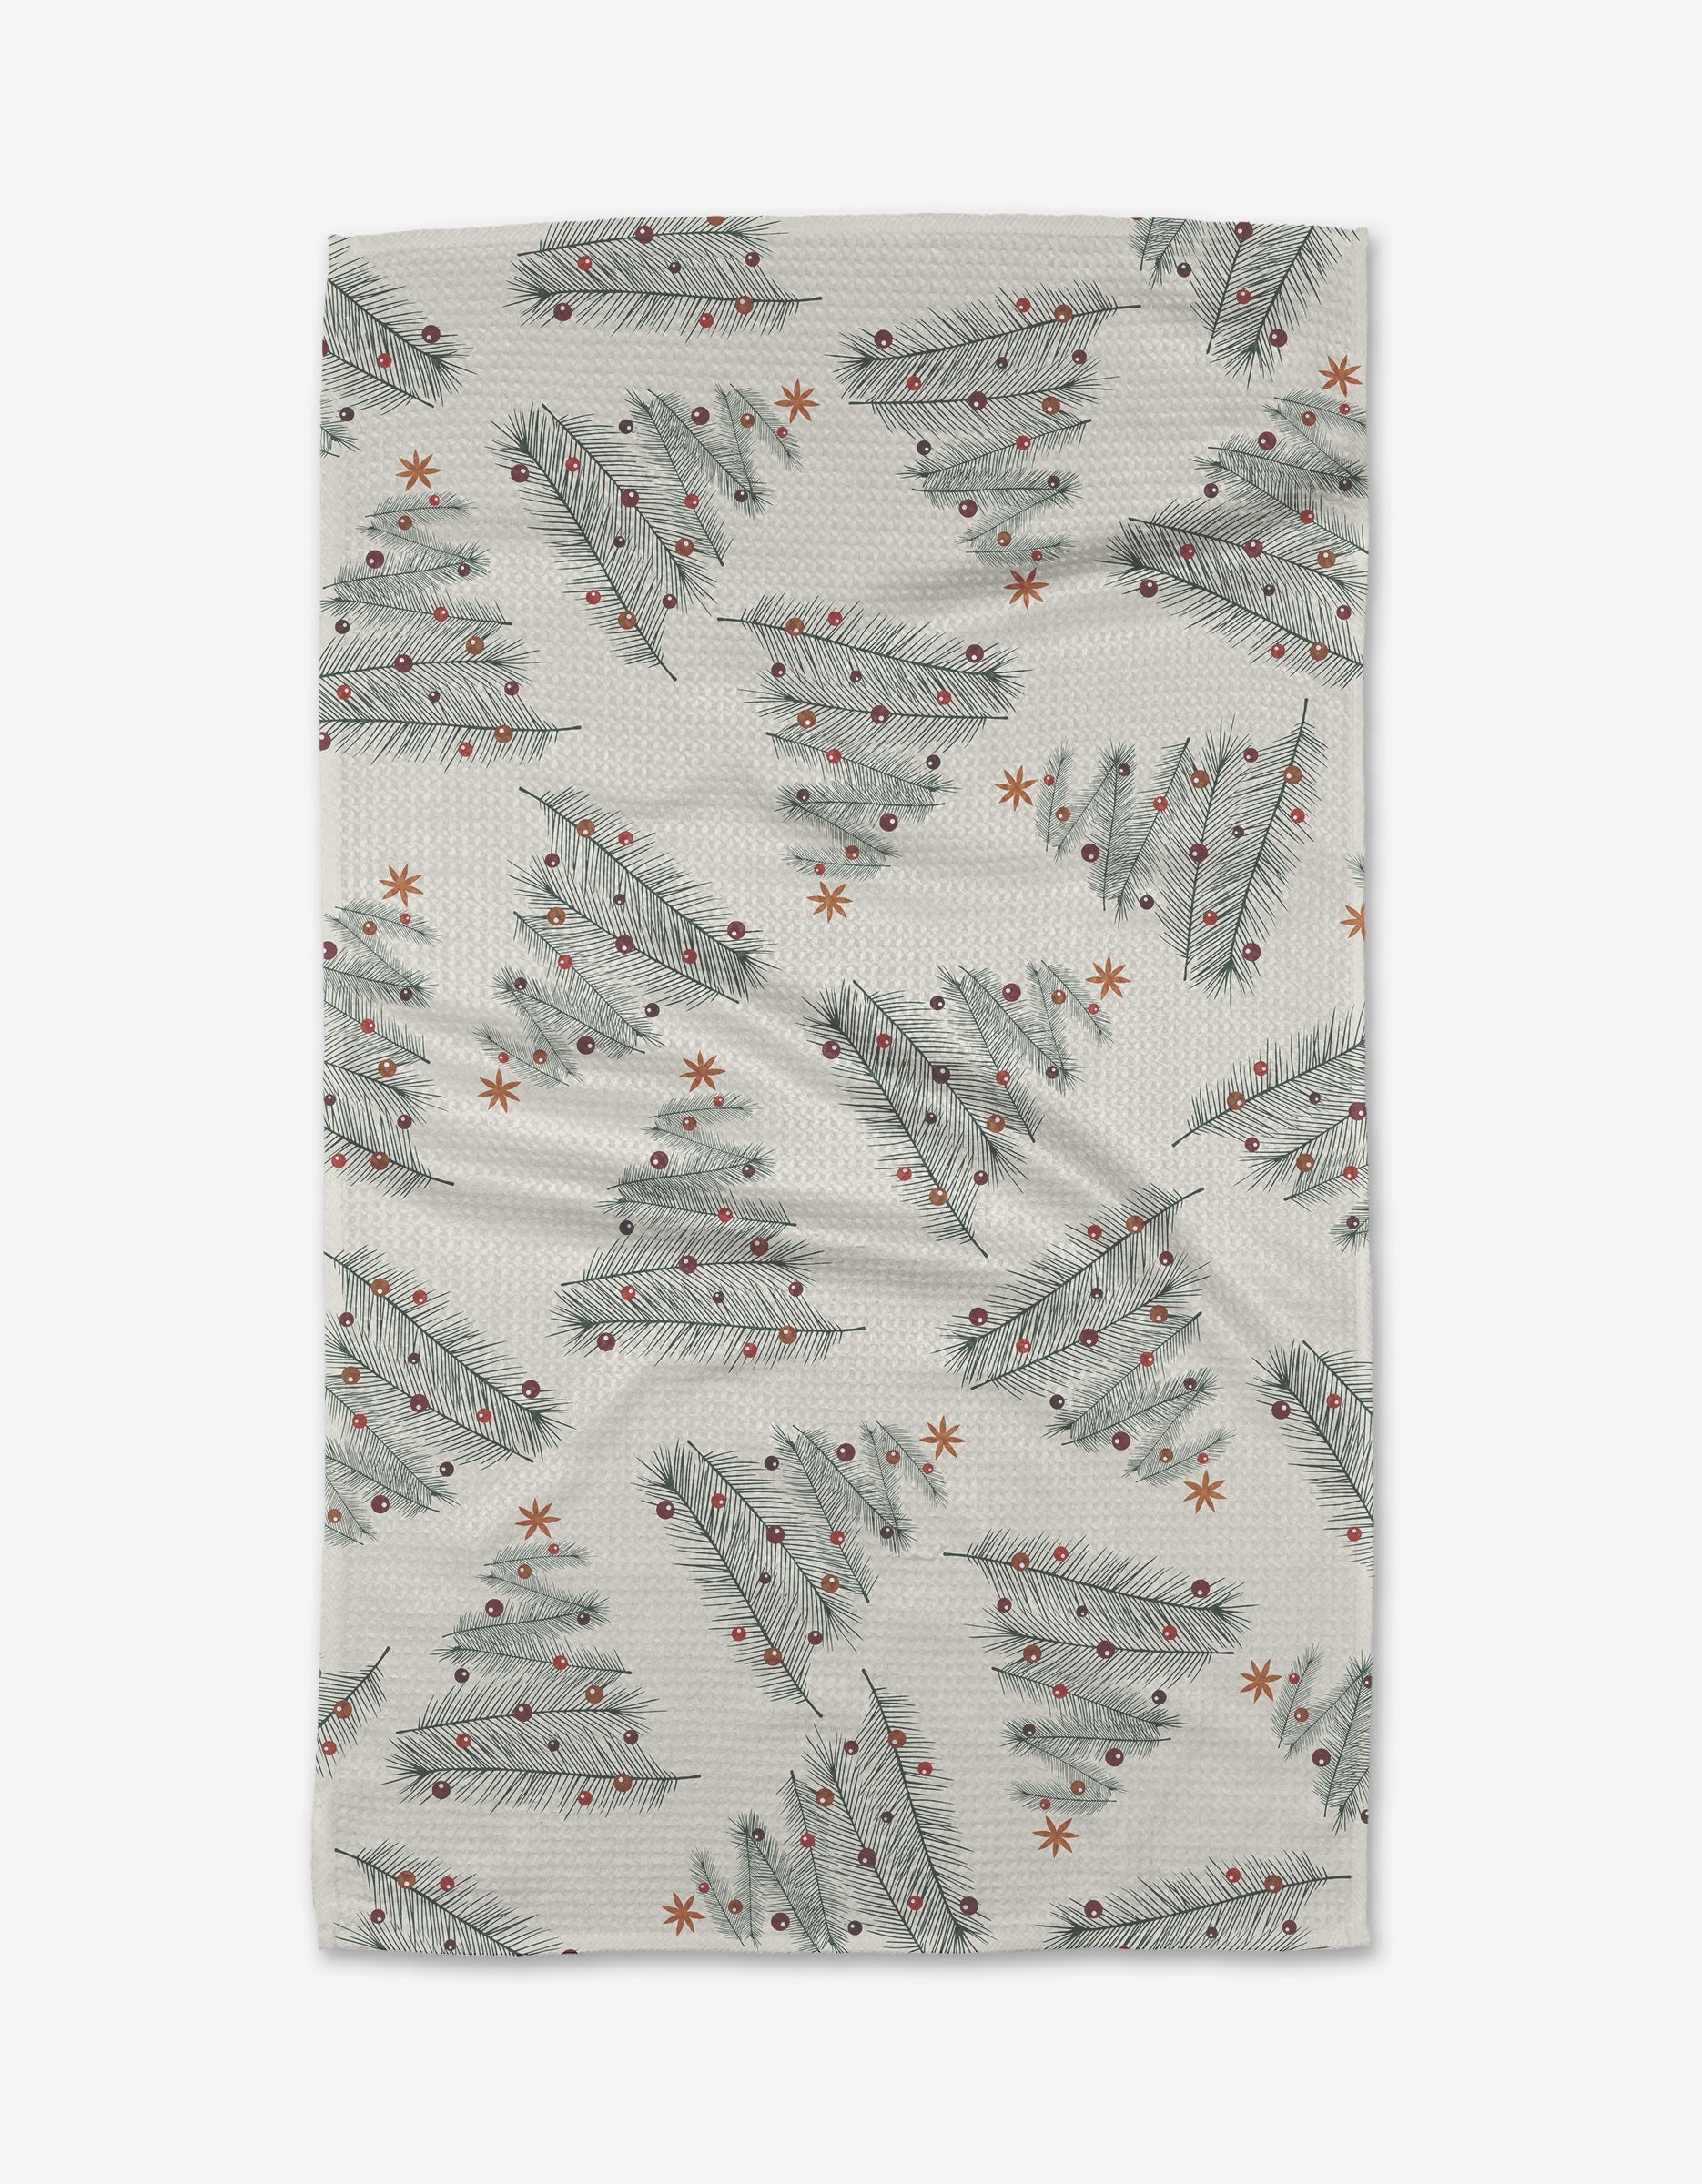 Get Festive with Becki Owens x Geometry Holiday Towel Collection